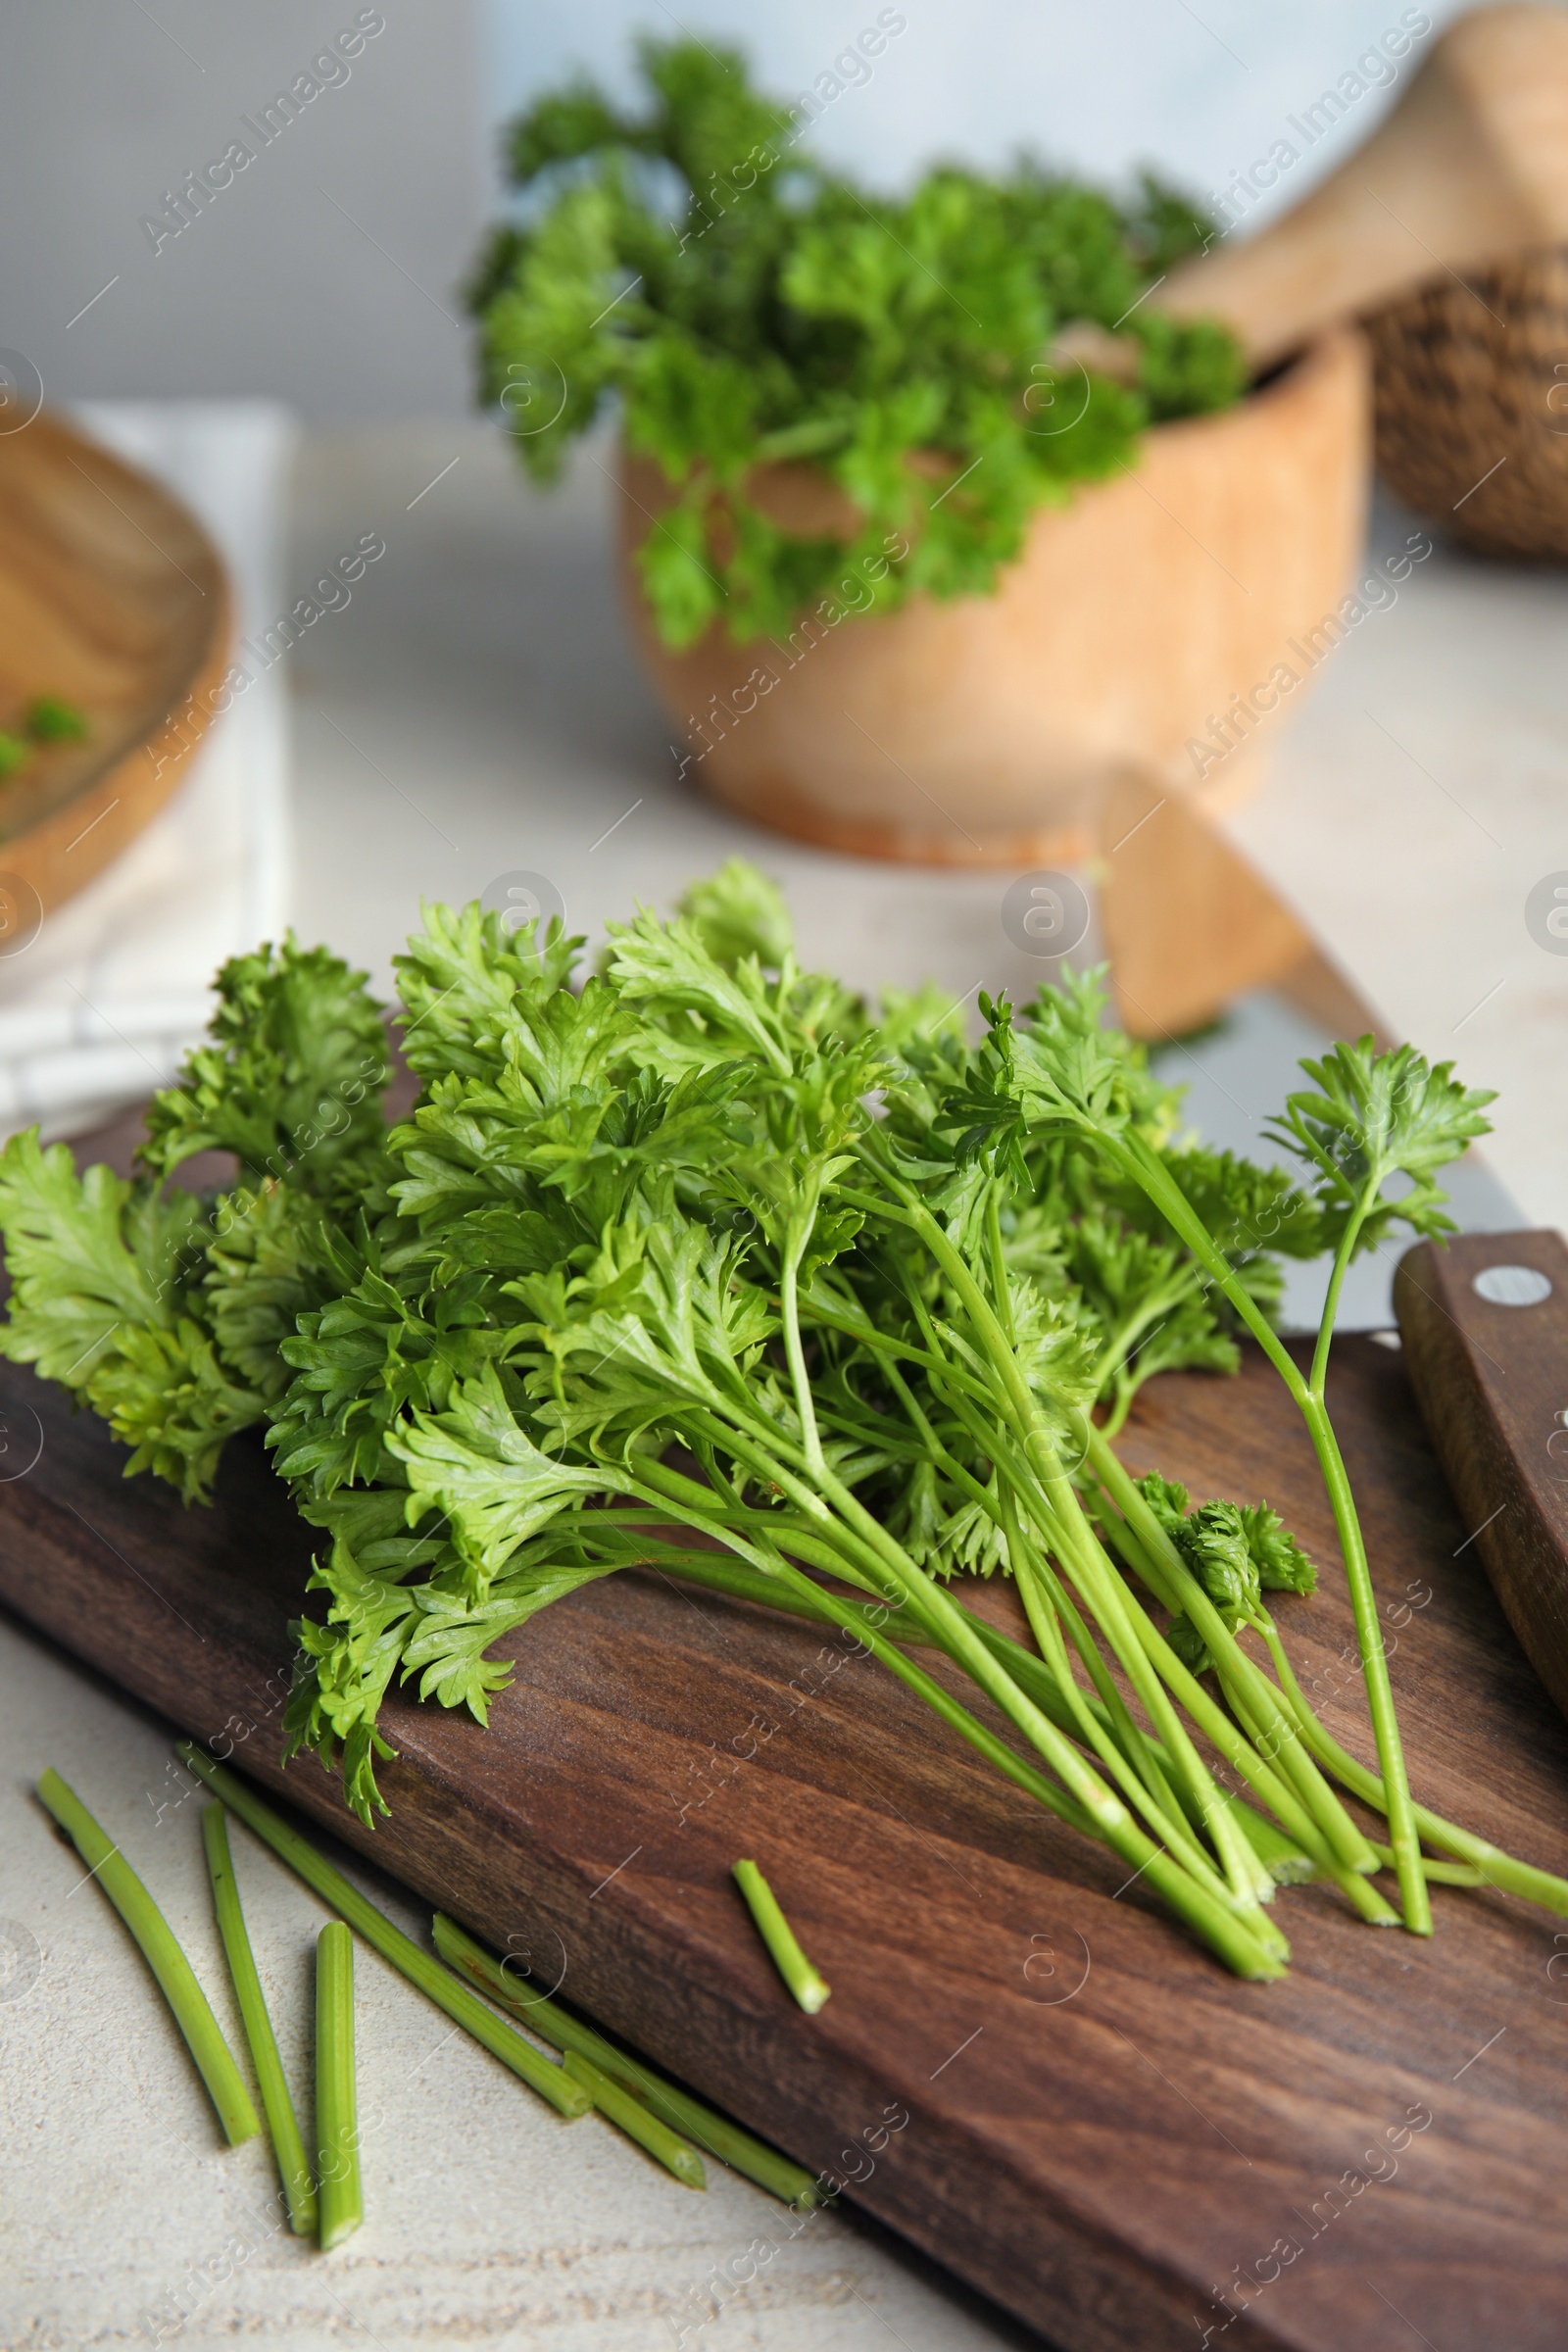 Photo of Wooden board with fresh green parsley on table